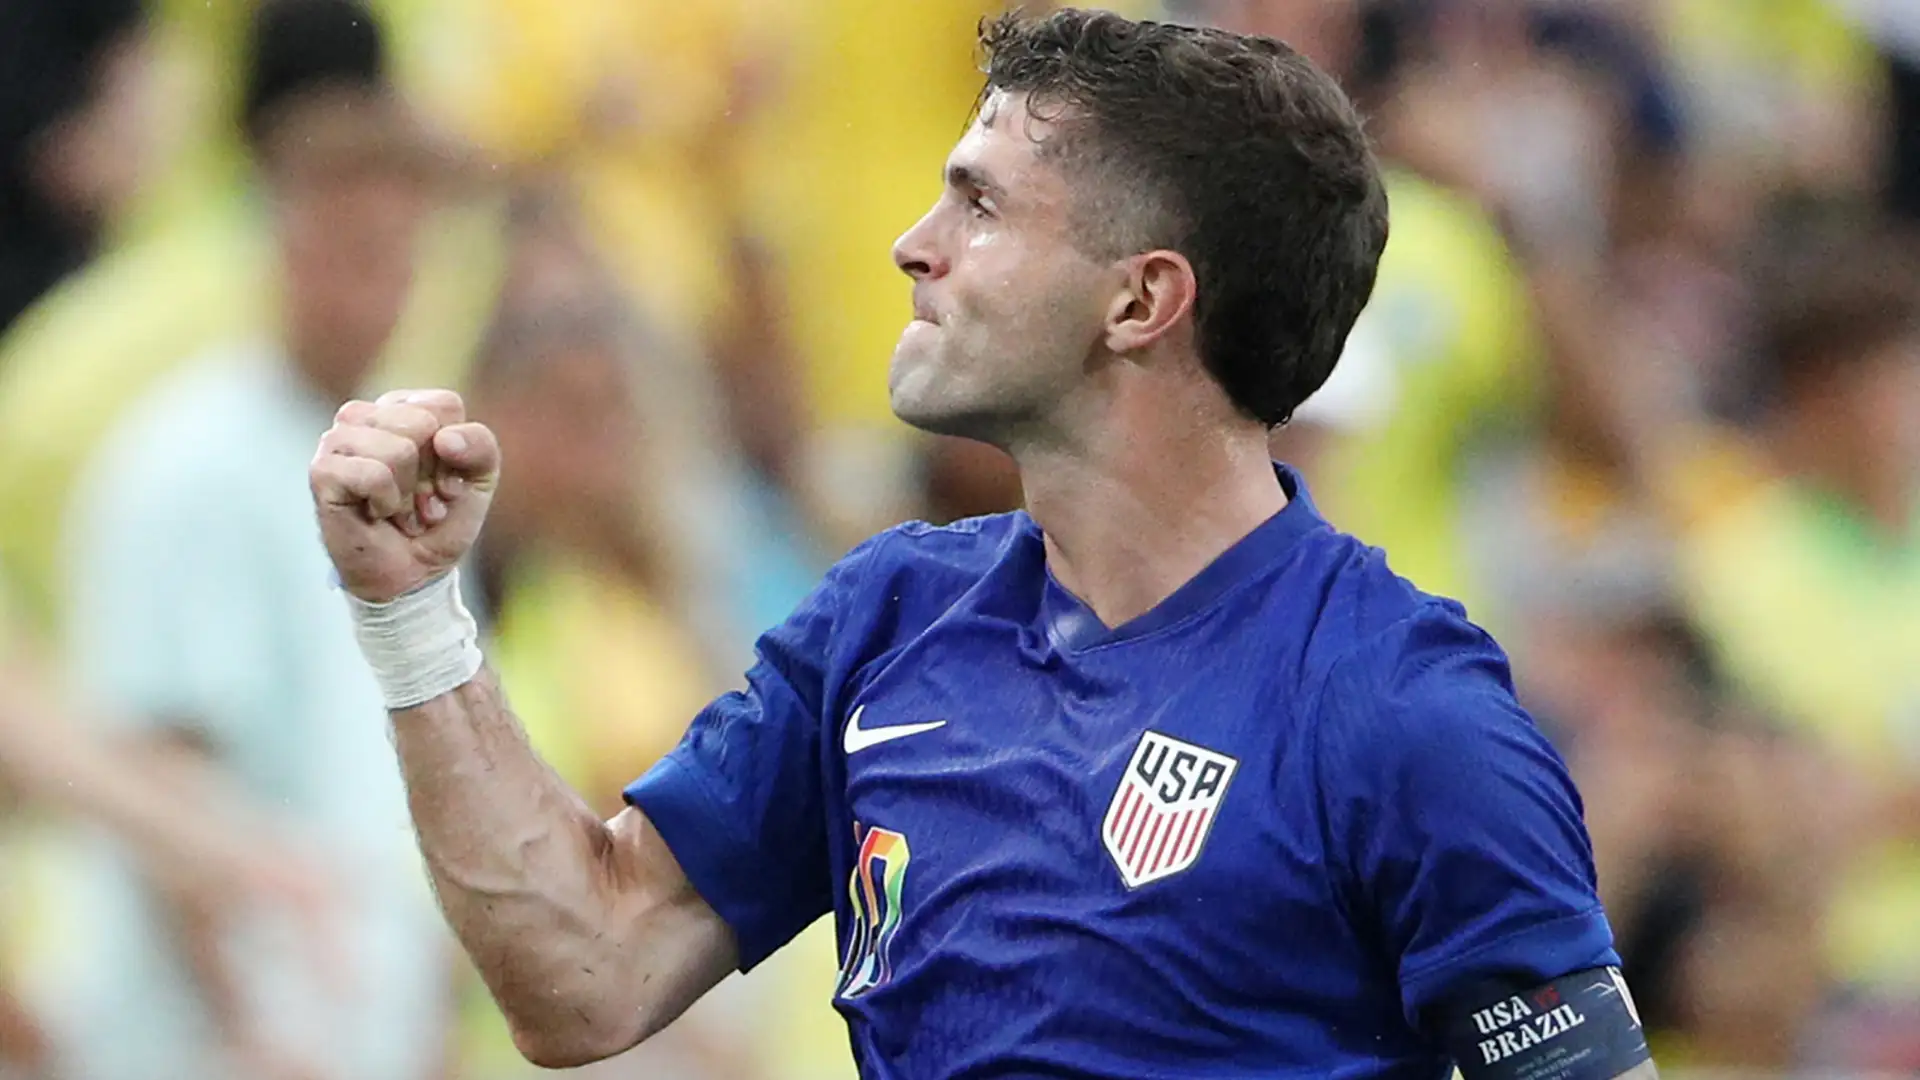 Christian Pulisic records notable first for USMNT with 29th goal & breaks Brazil cycle dating back three years to strike from Inter Miami & Uruguay star Luis Suarez